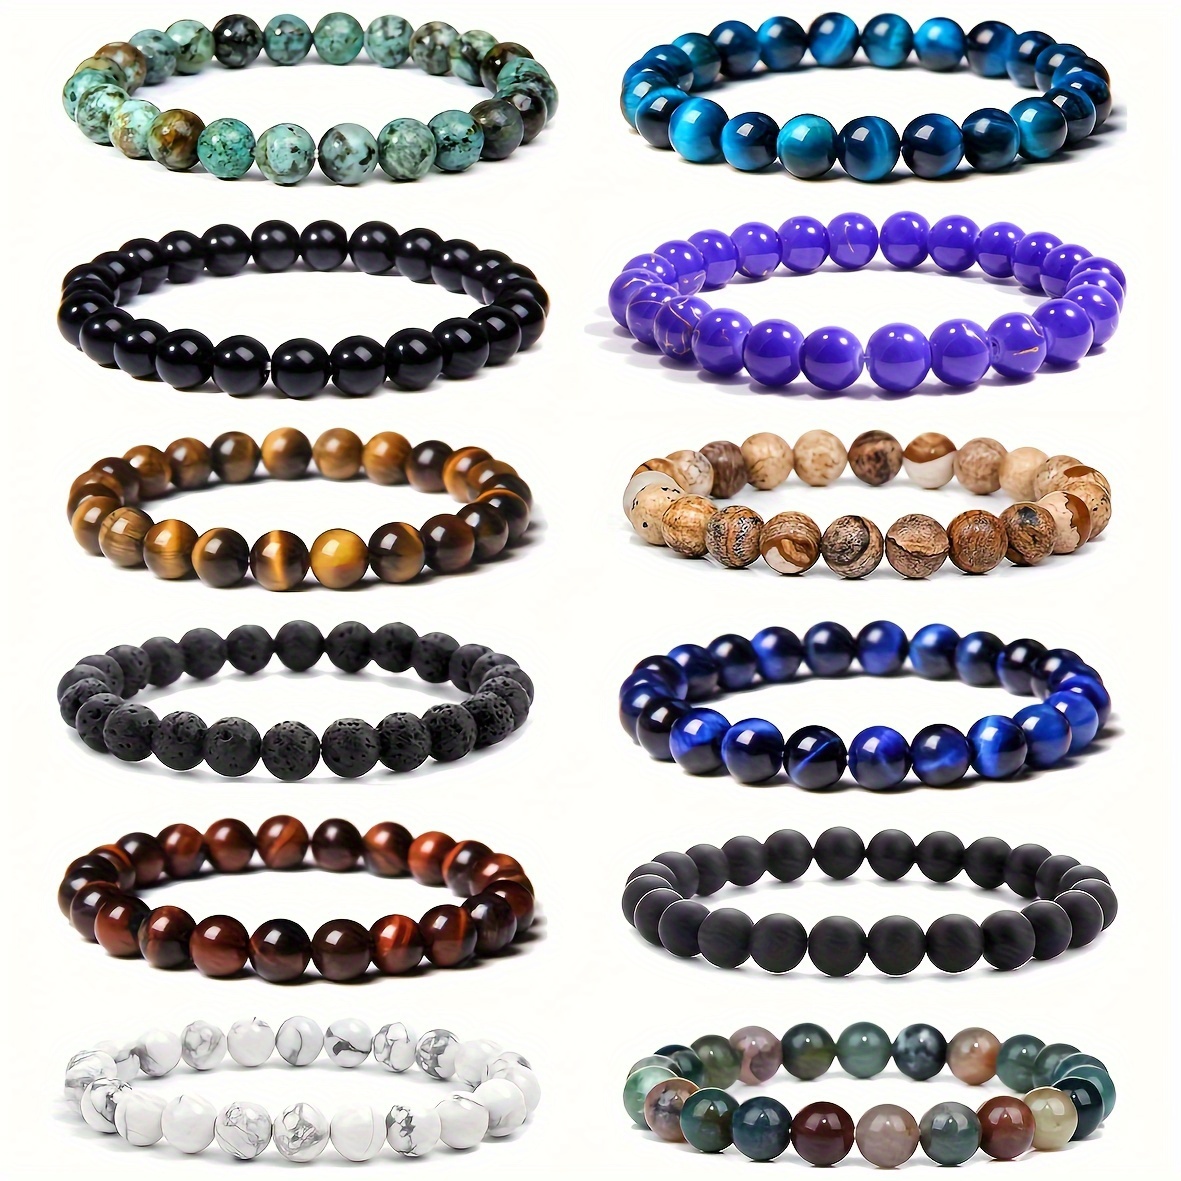 

12pcs Natural Gemstone Beaded Stretch Bracelets, Unisex Bead Bracelet, Match Daily Outfits, Party Accessories, Choose Your Color